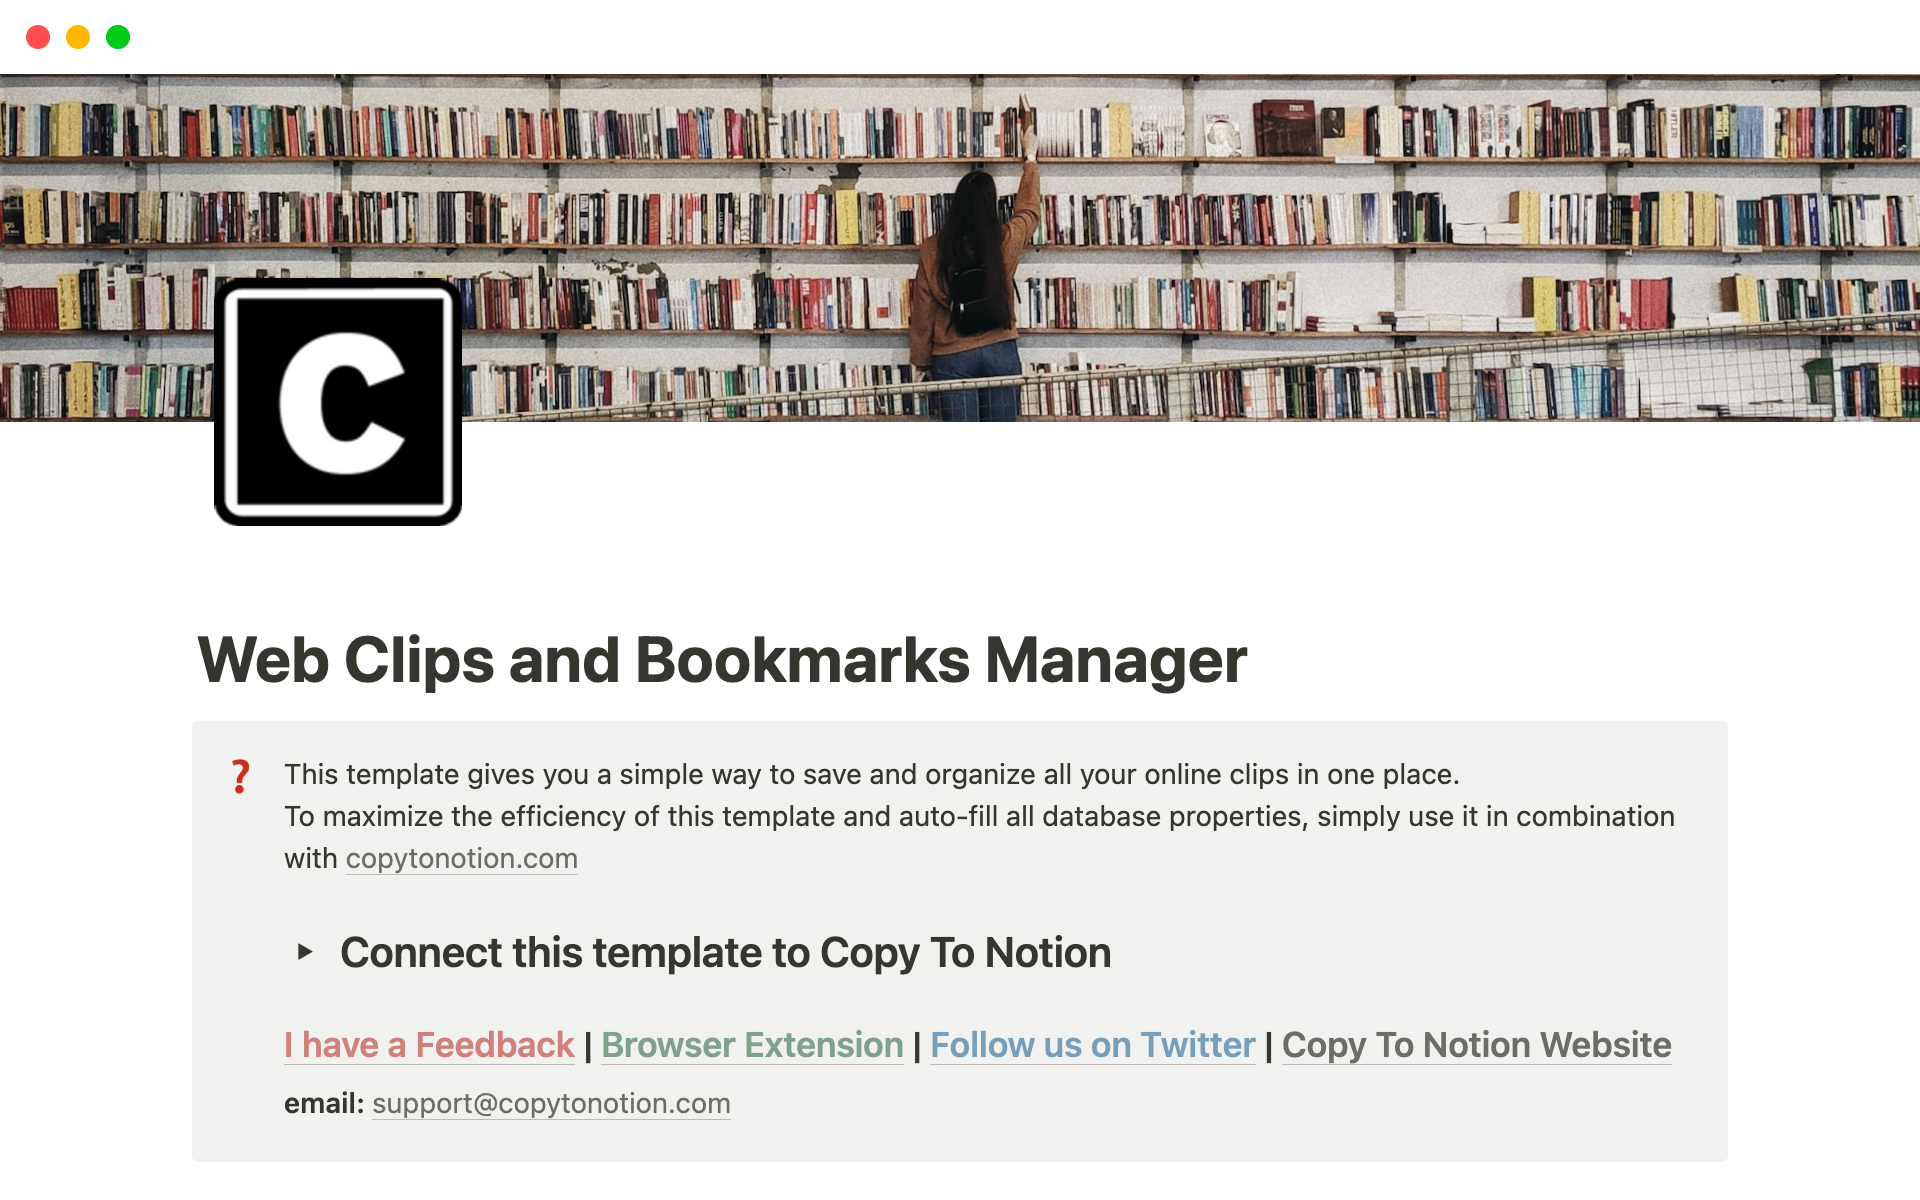 Web Clips and Bookmarks Managerのテンプレートのプレビュー